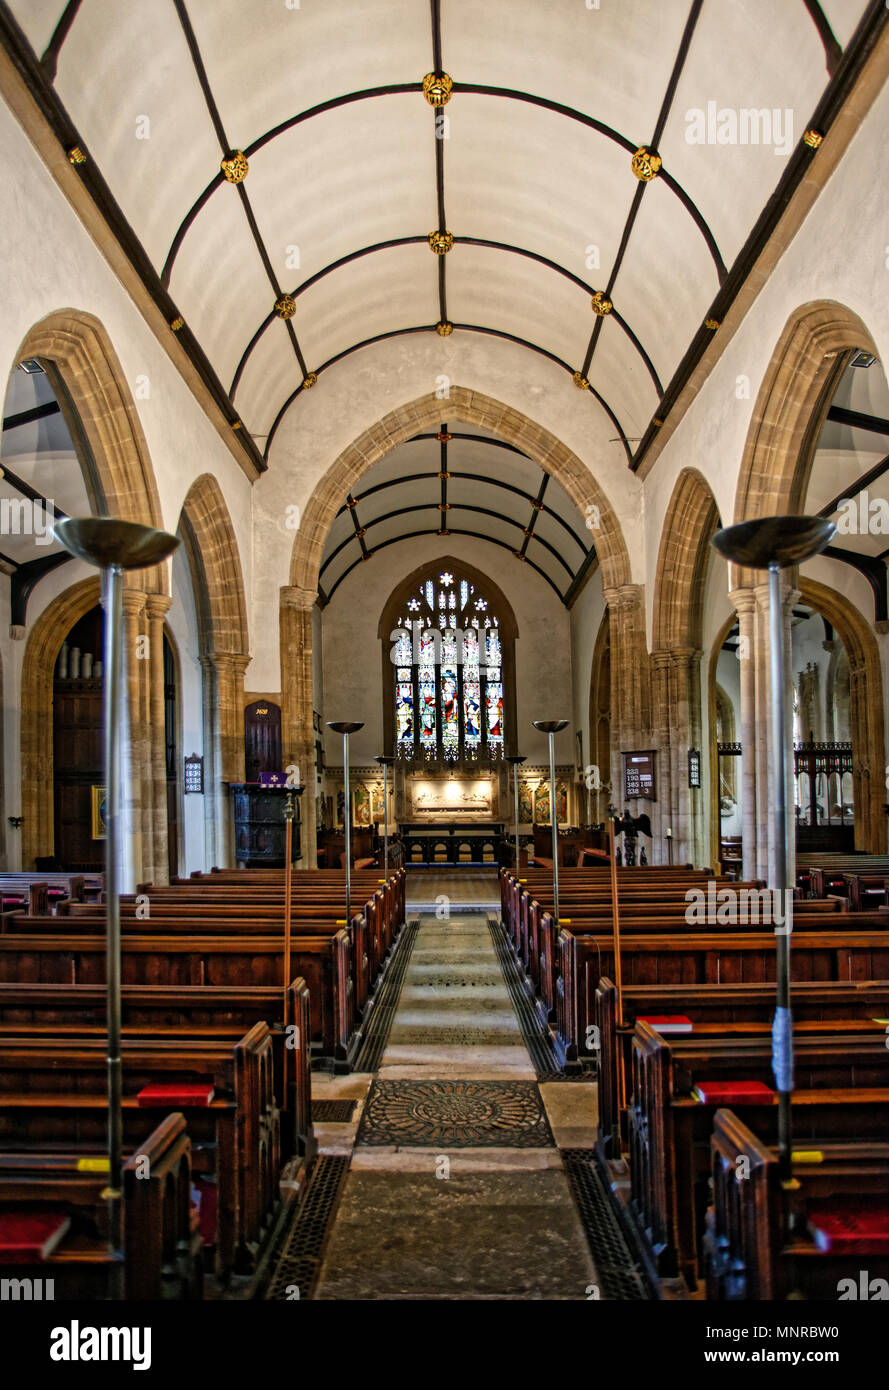 The building of St Peters Church, Dorchester, Dorset, largely dates from the mid fifteenth century, significantly restored in 1856-7 by J Hicks. Stock Photo